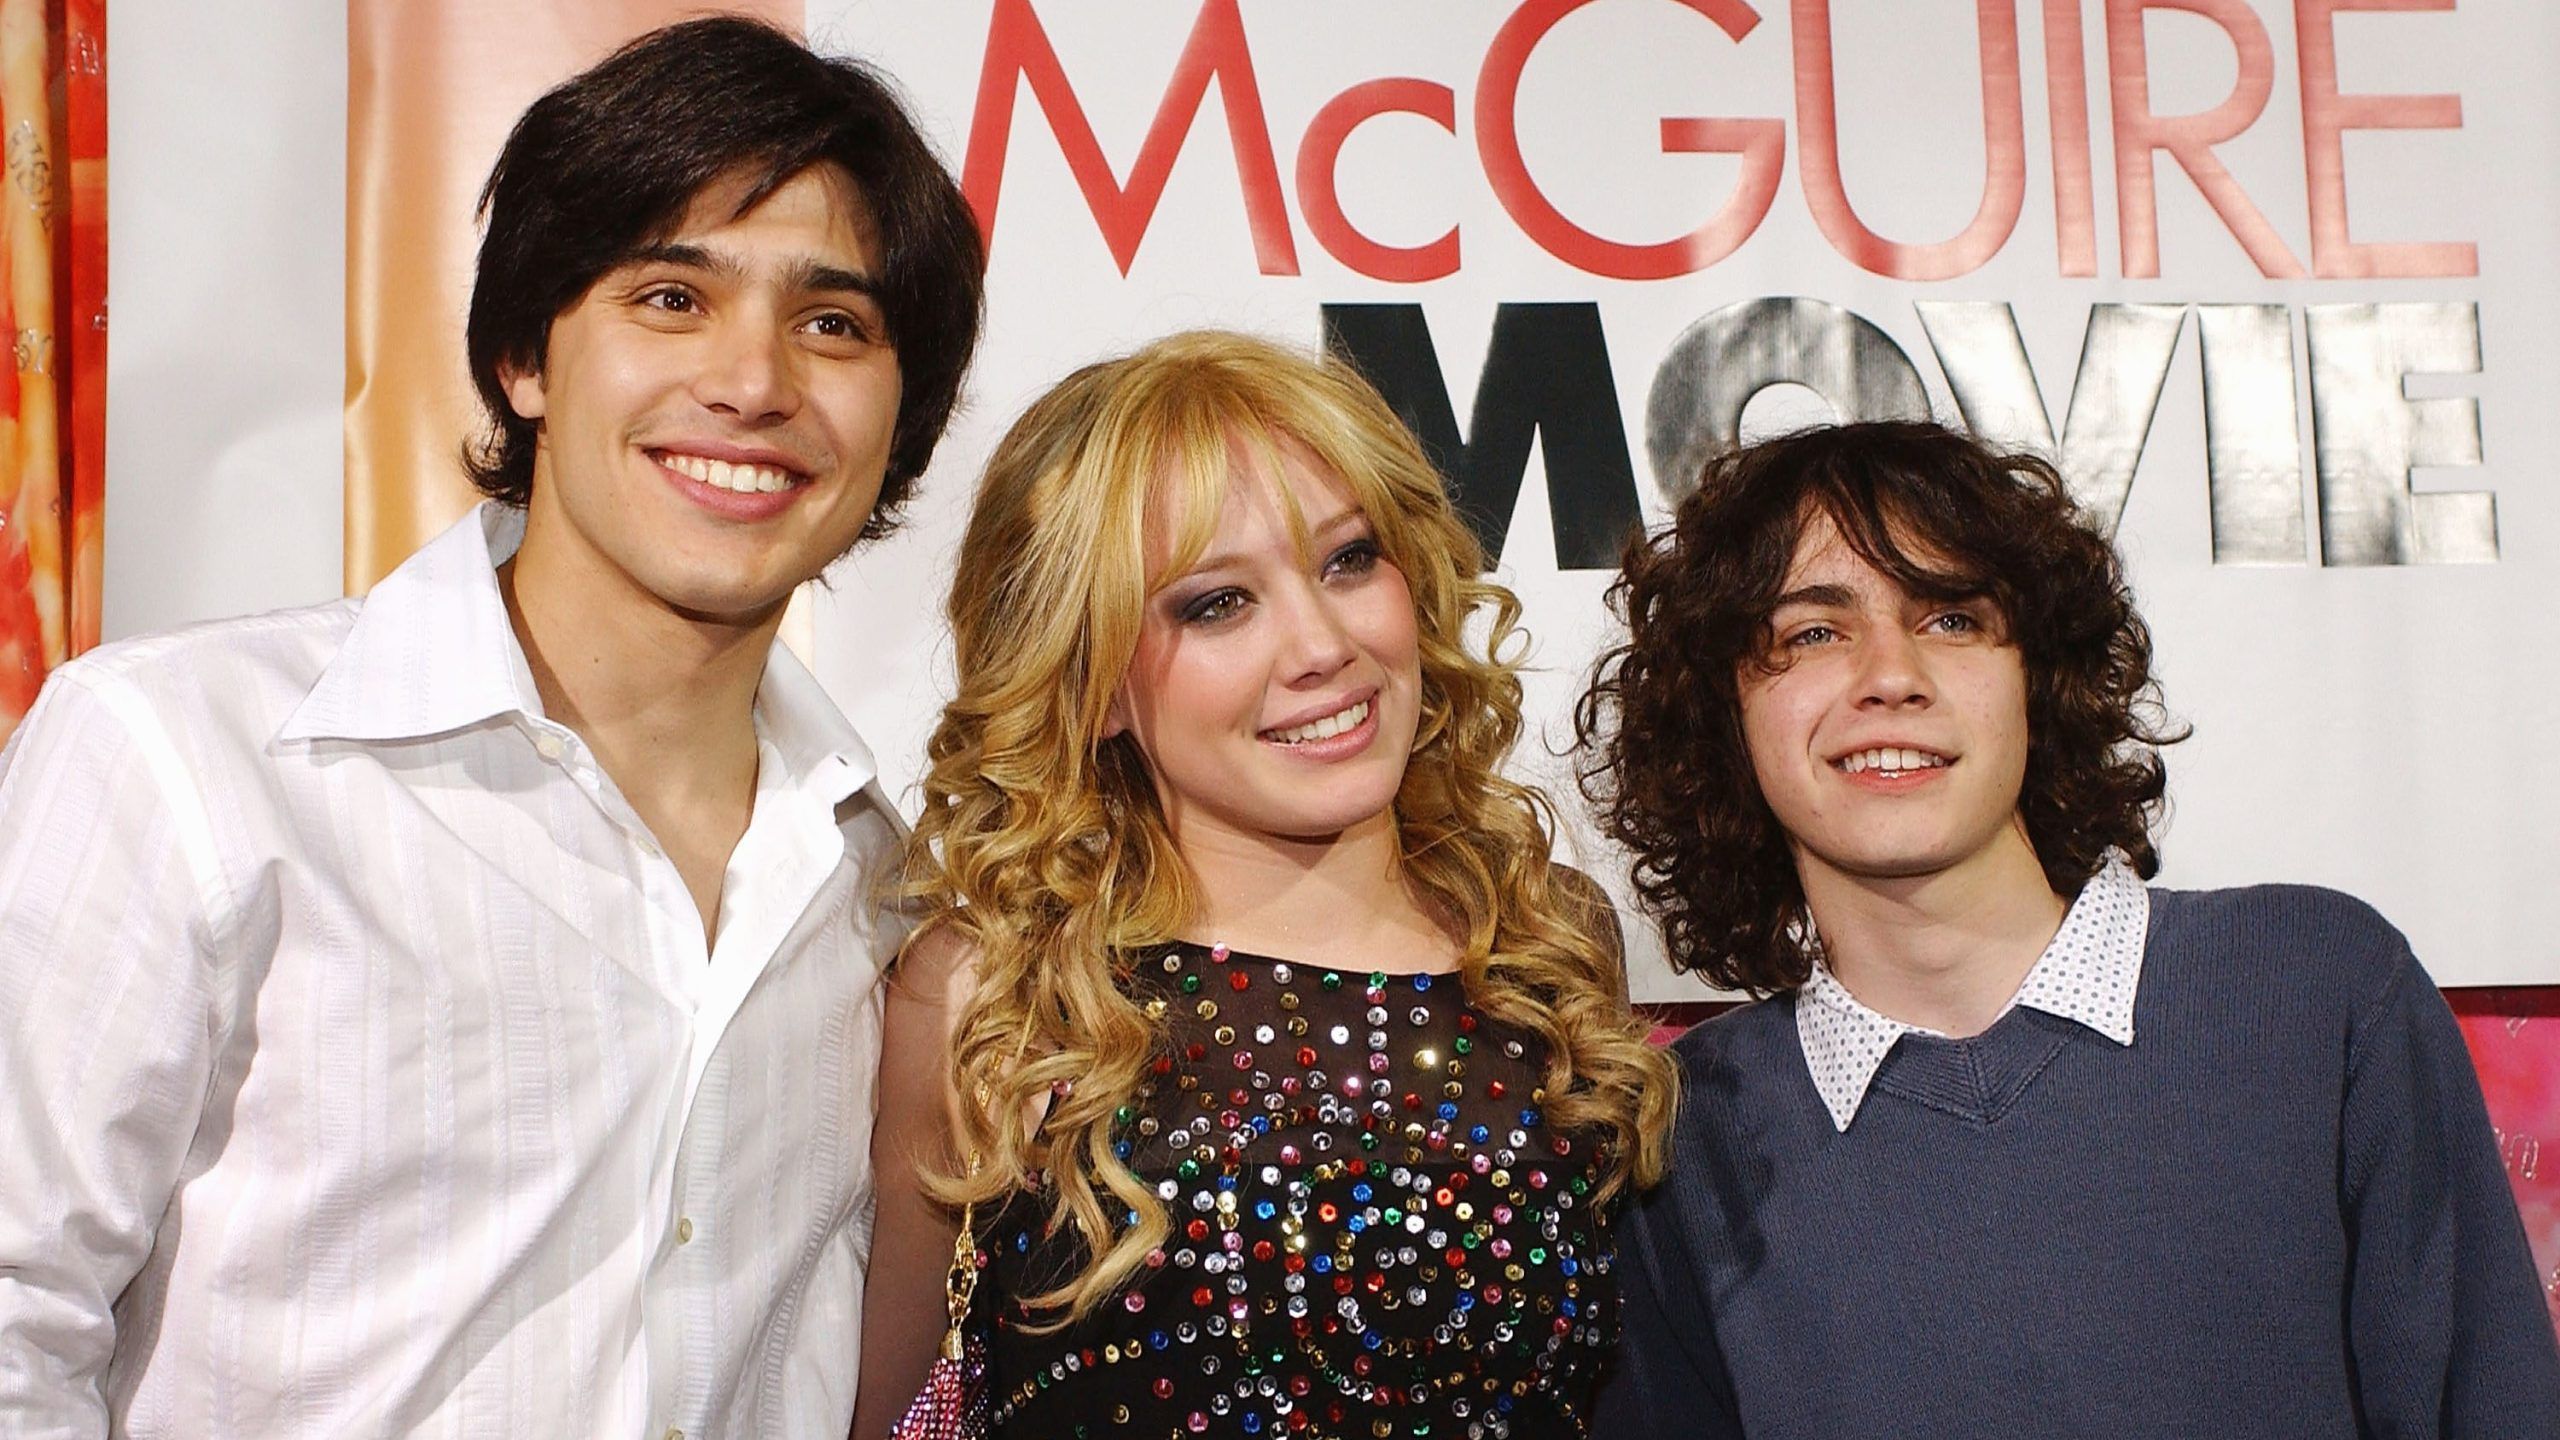 Lizzie McGuire' reboot coming to Disney+ streaming service